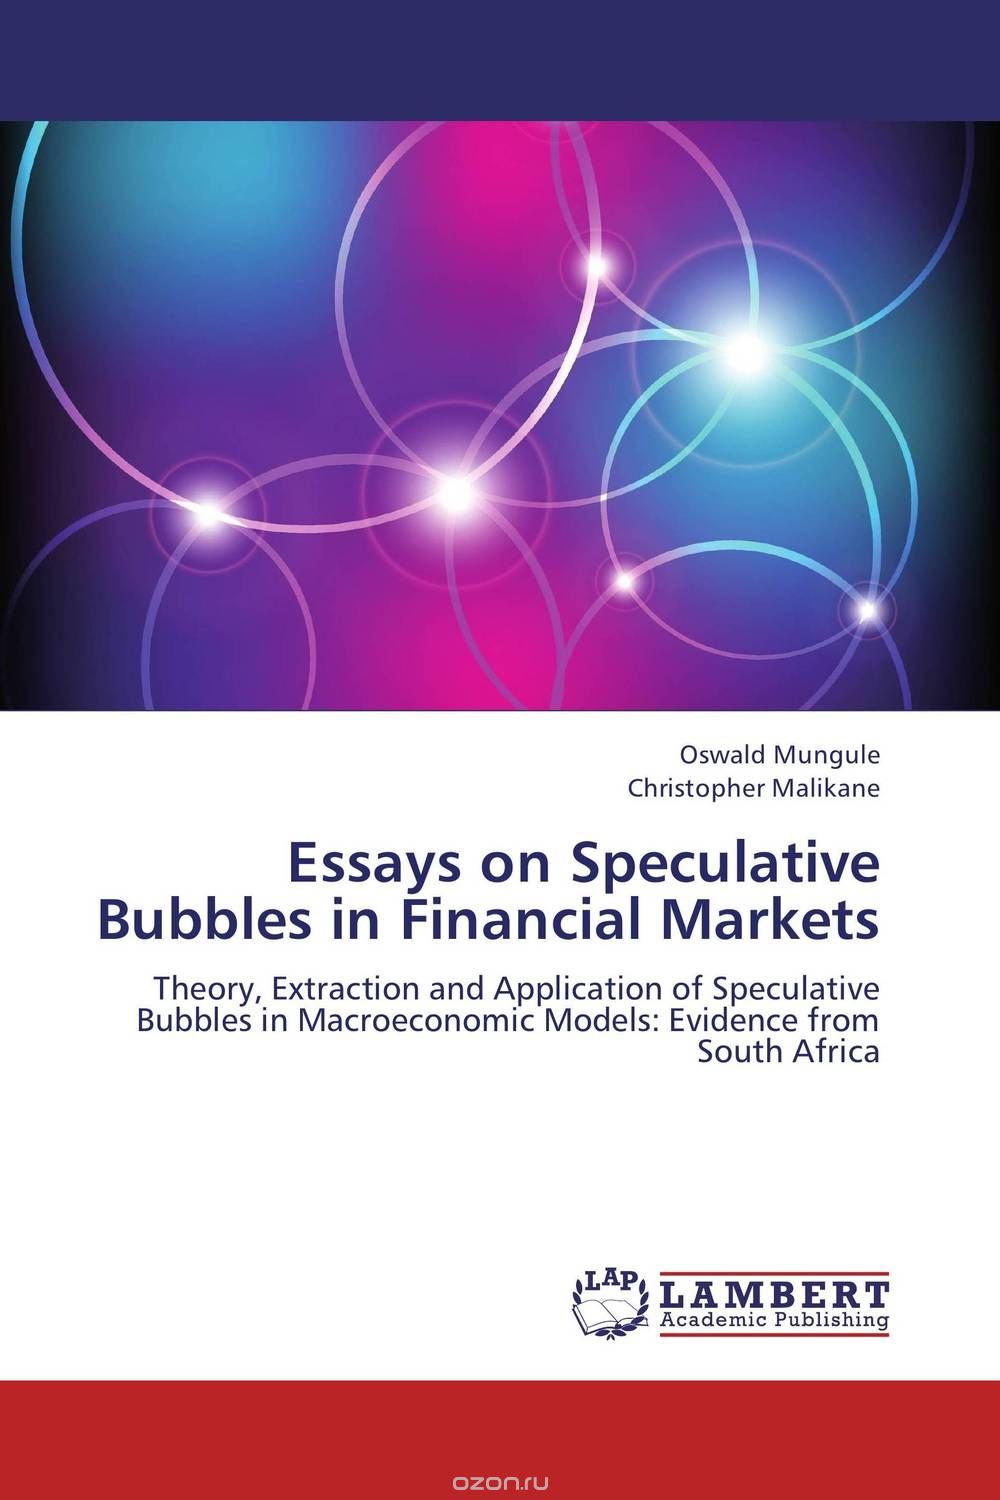 Essays on Speculative Bubbles in Financial Markets